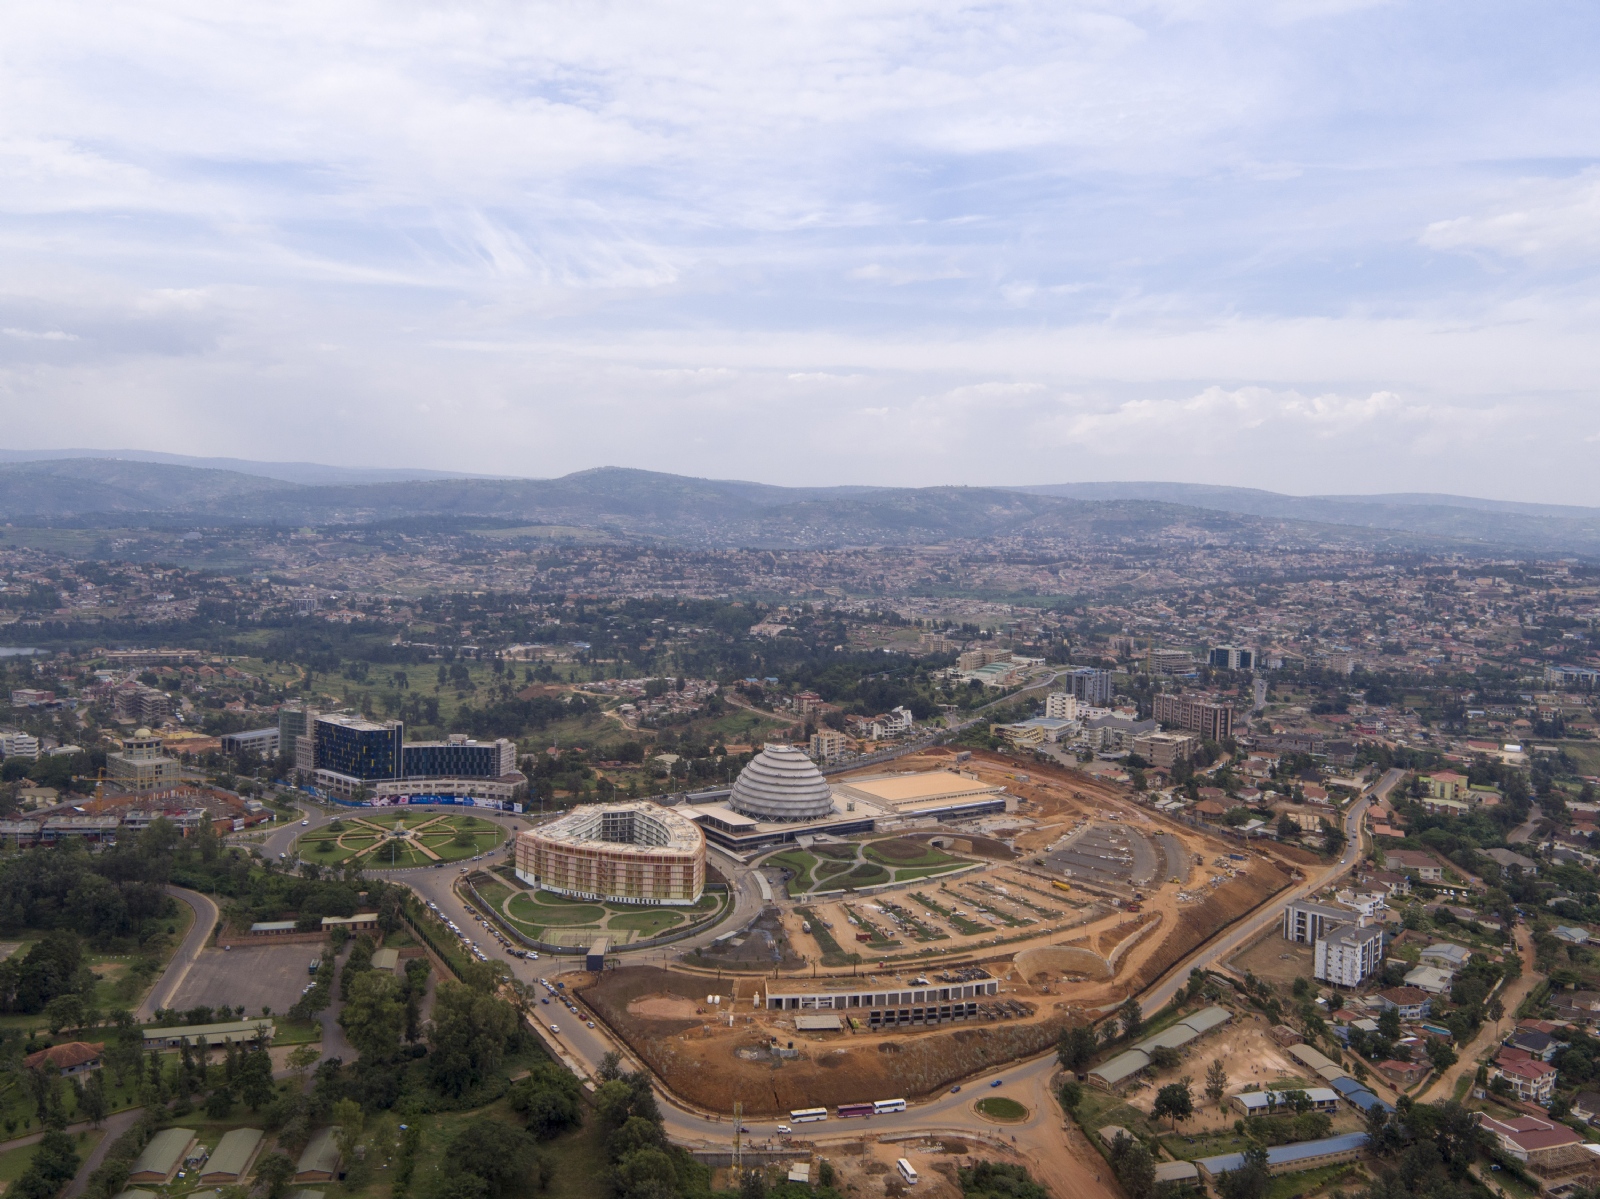 Aerial view of completed Convention Centre & Hotel with the city of Kigali in the background (summa.com.tr)